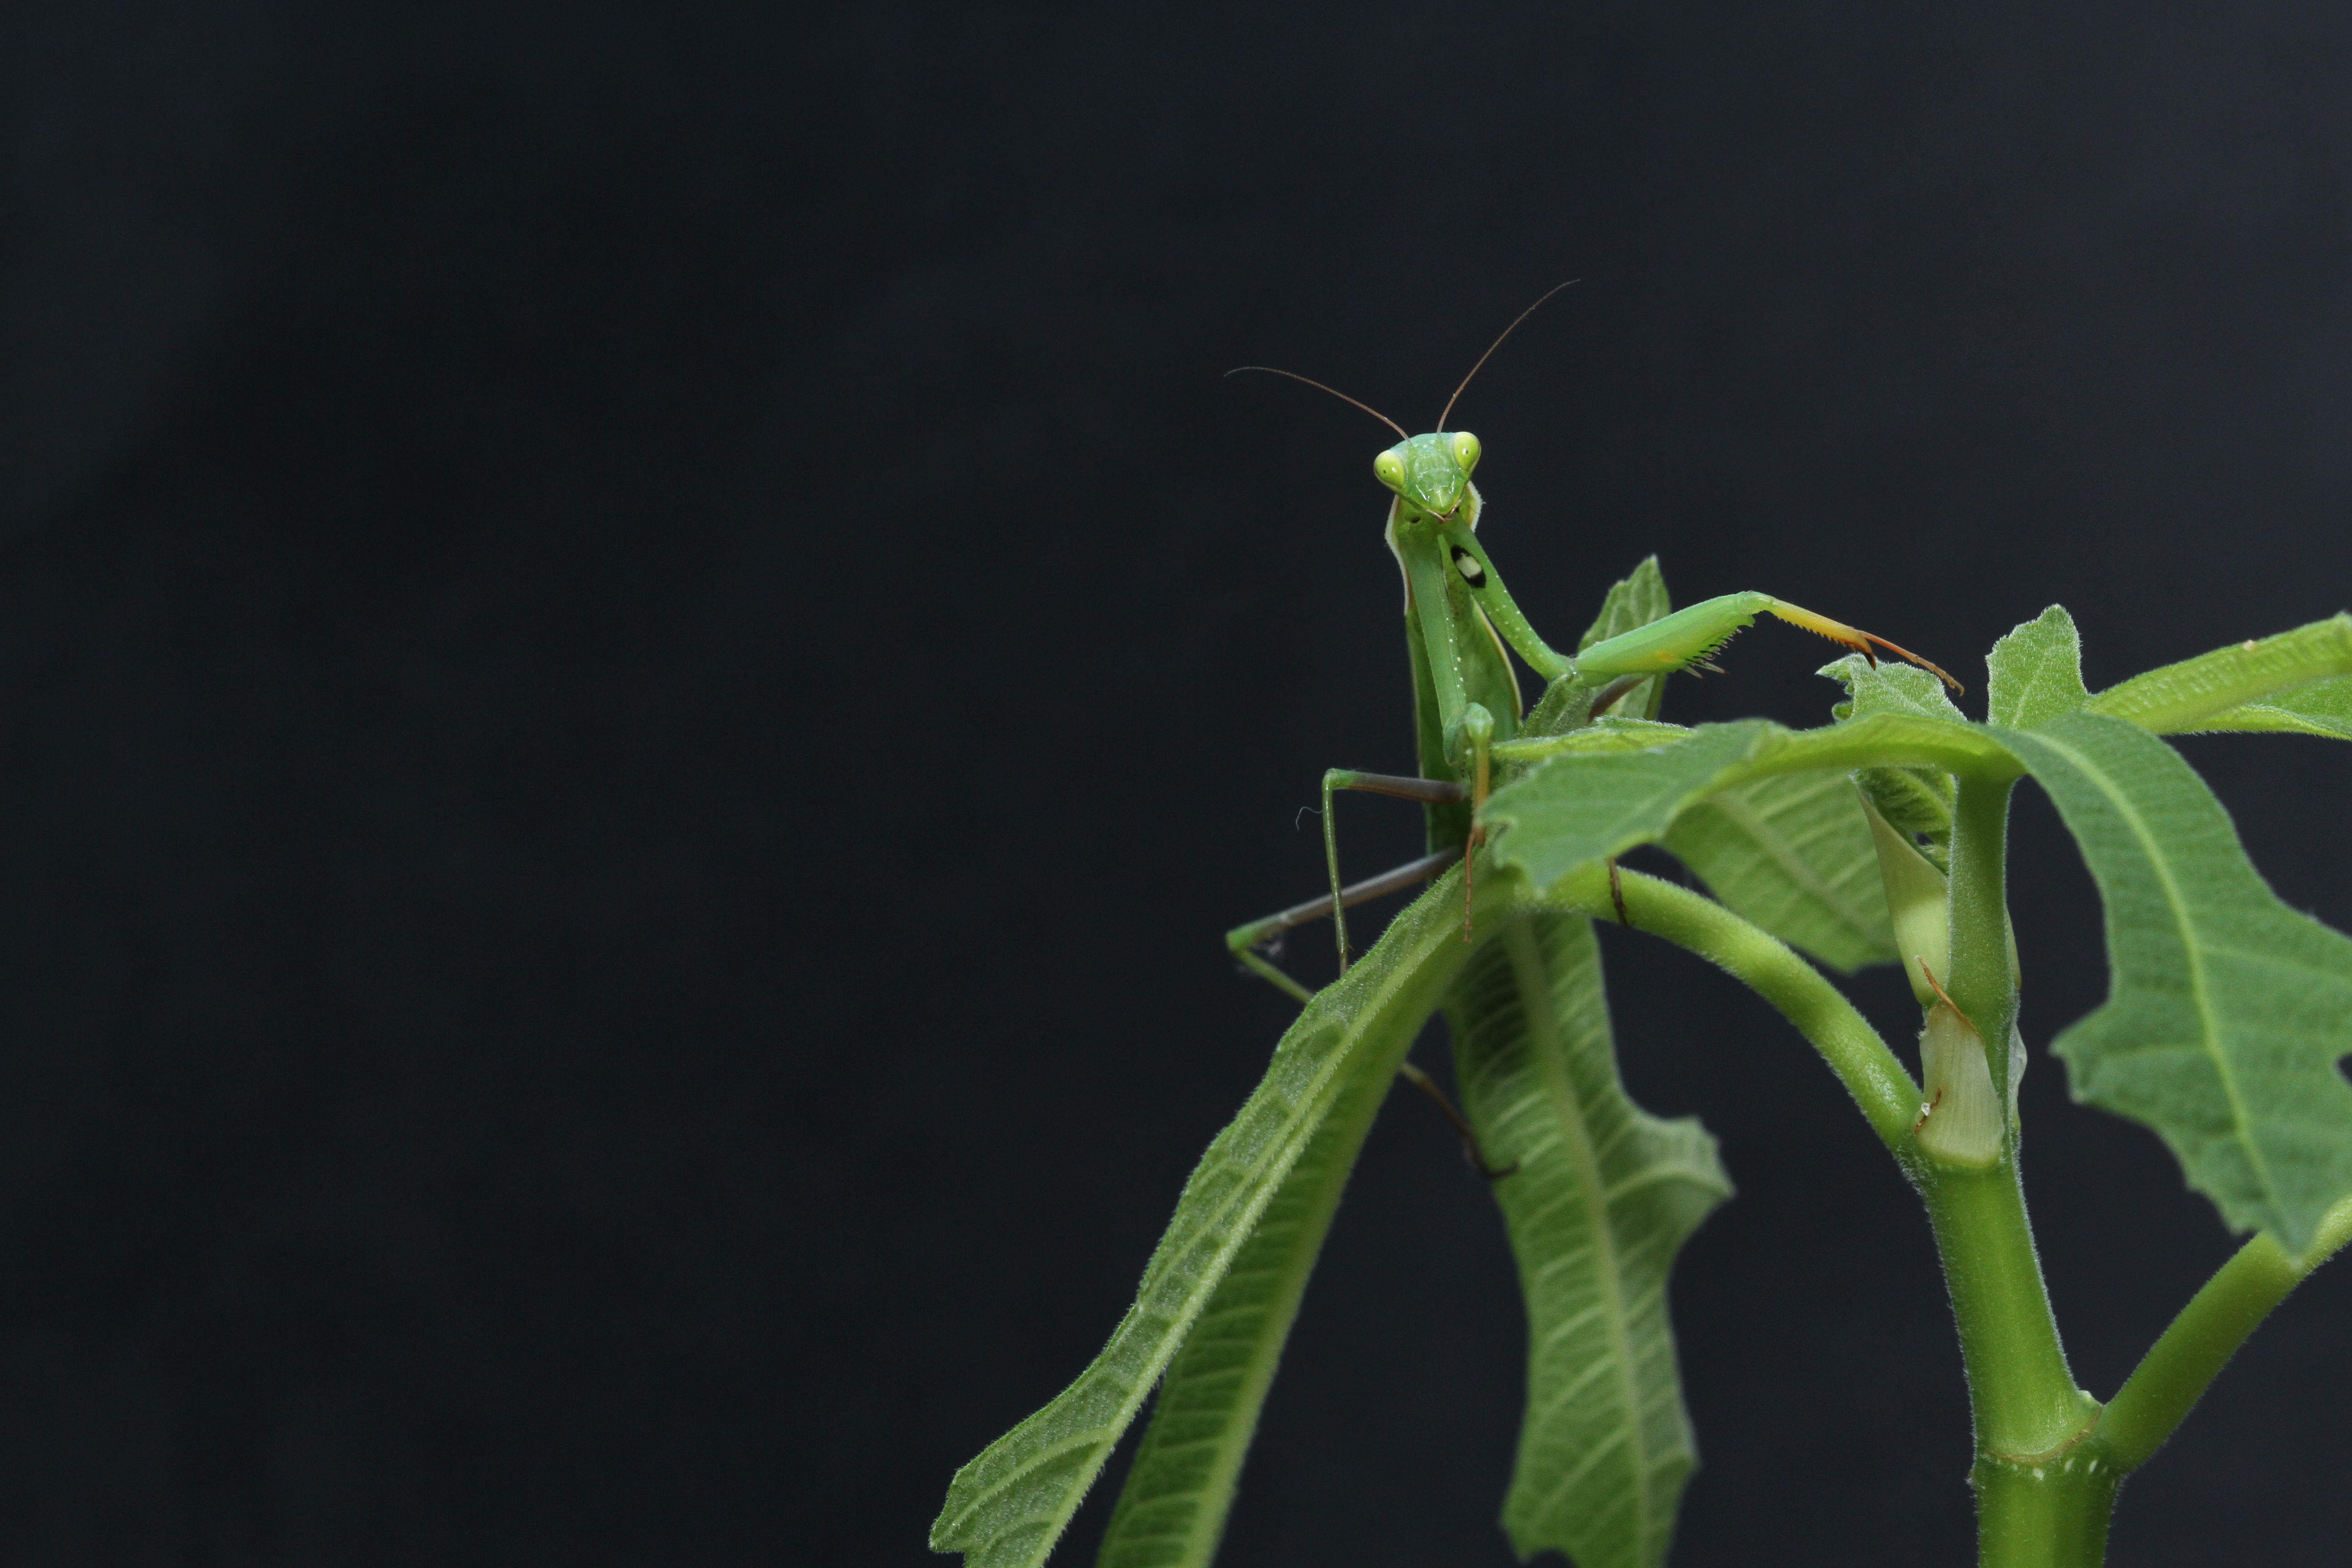 Grasshopper, Fly, Green, Insect, Nature, HQ Photo